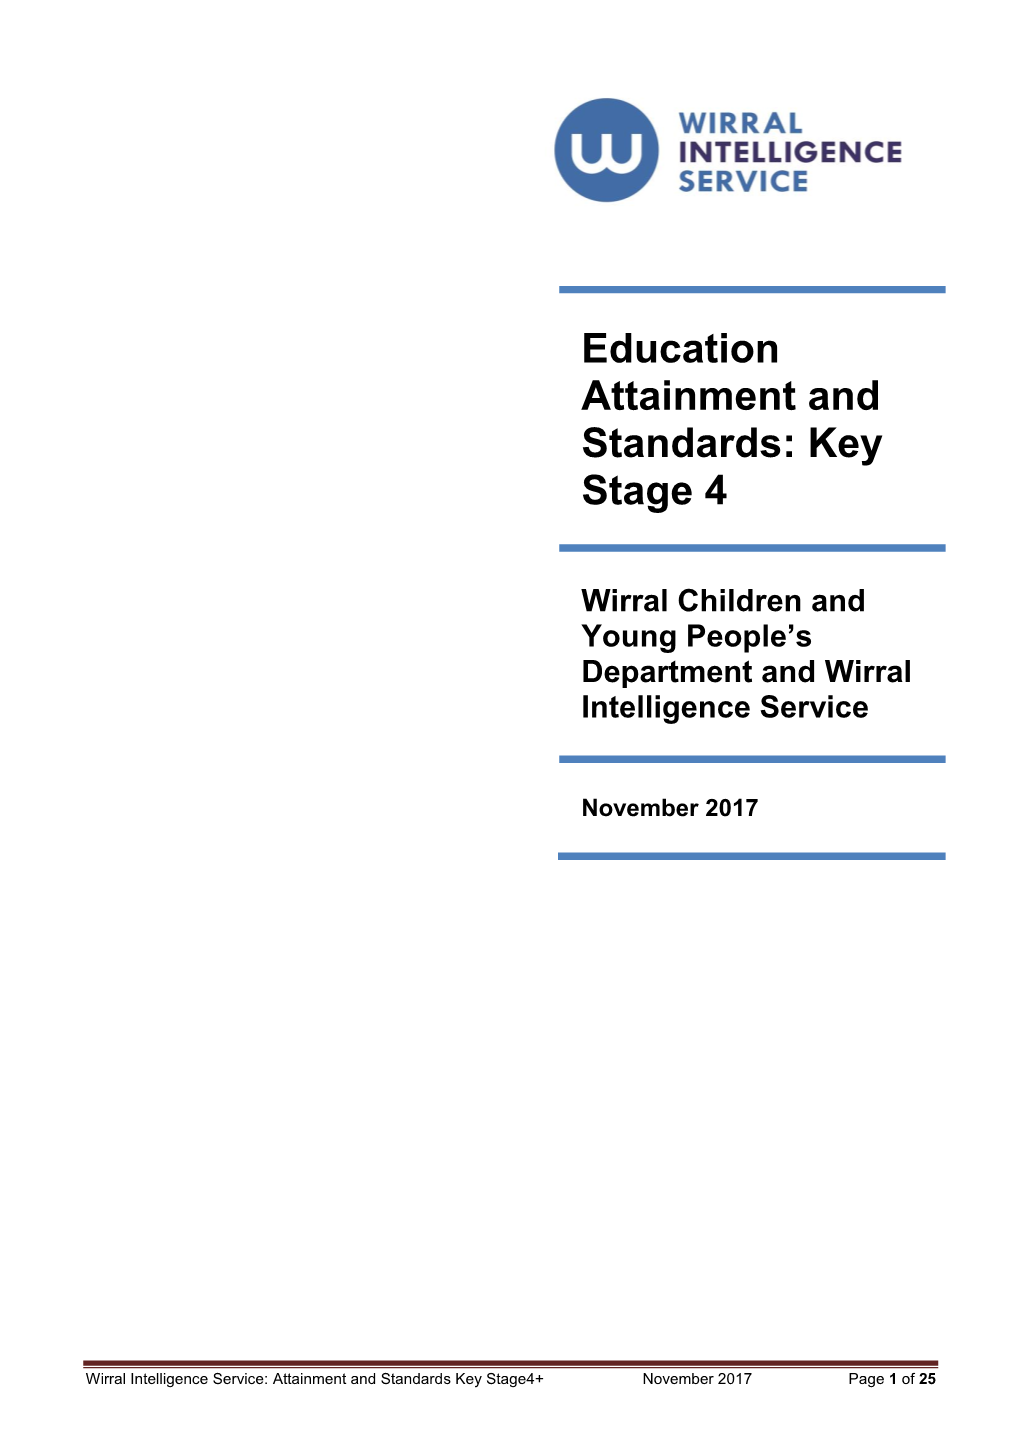 Education Attainment and Standards: Key Stage 4